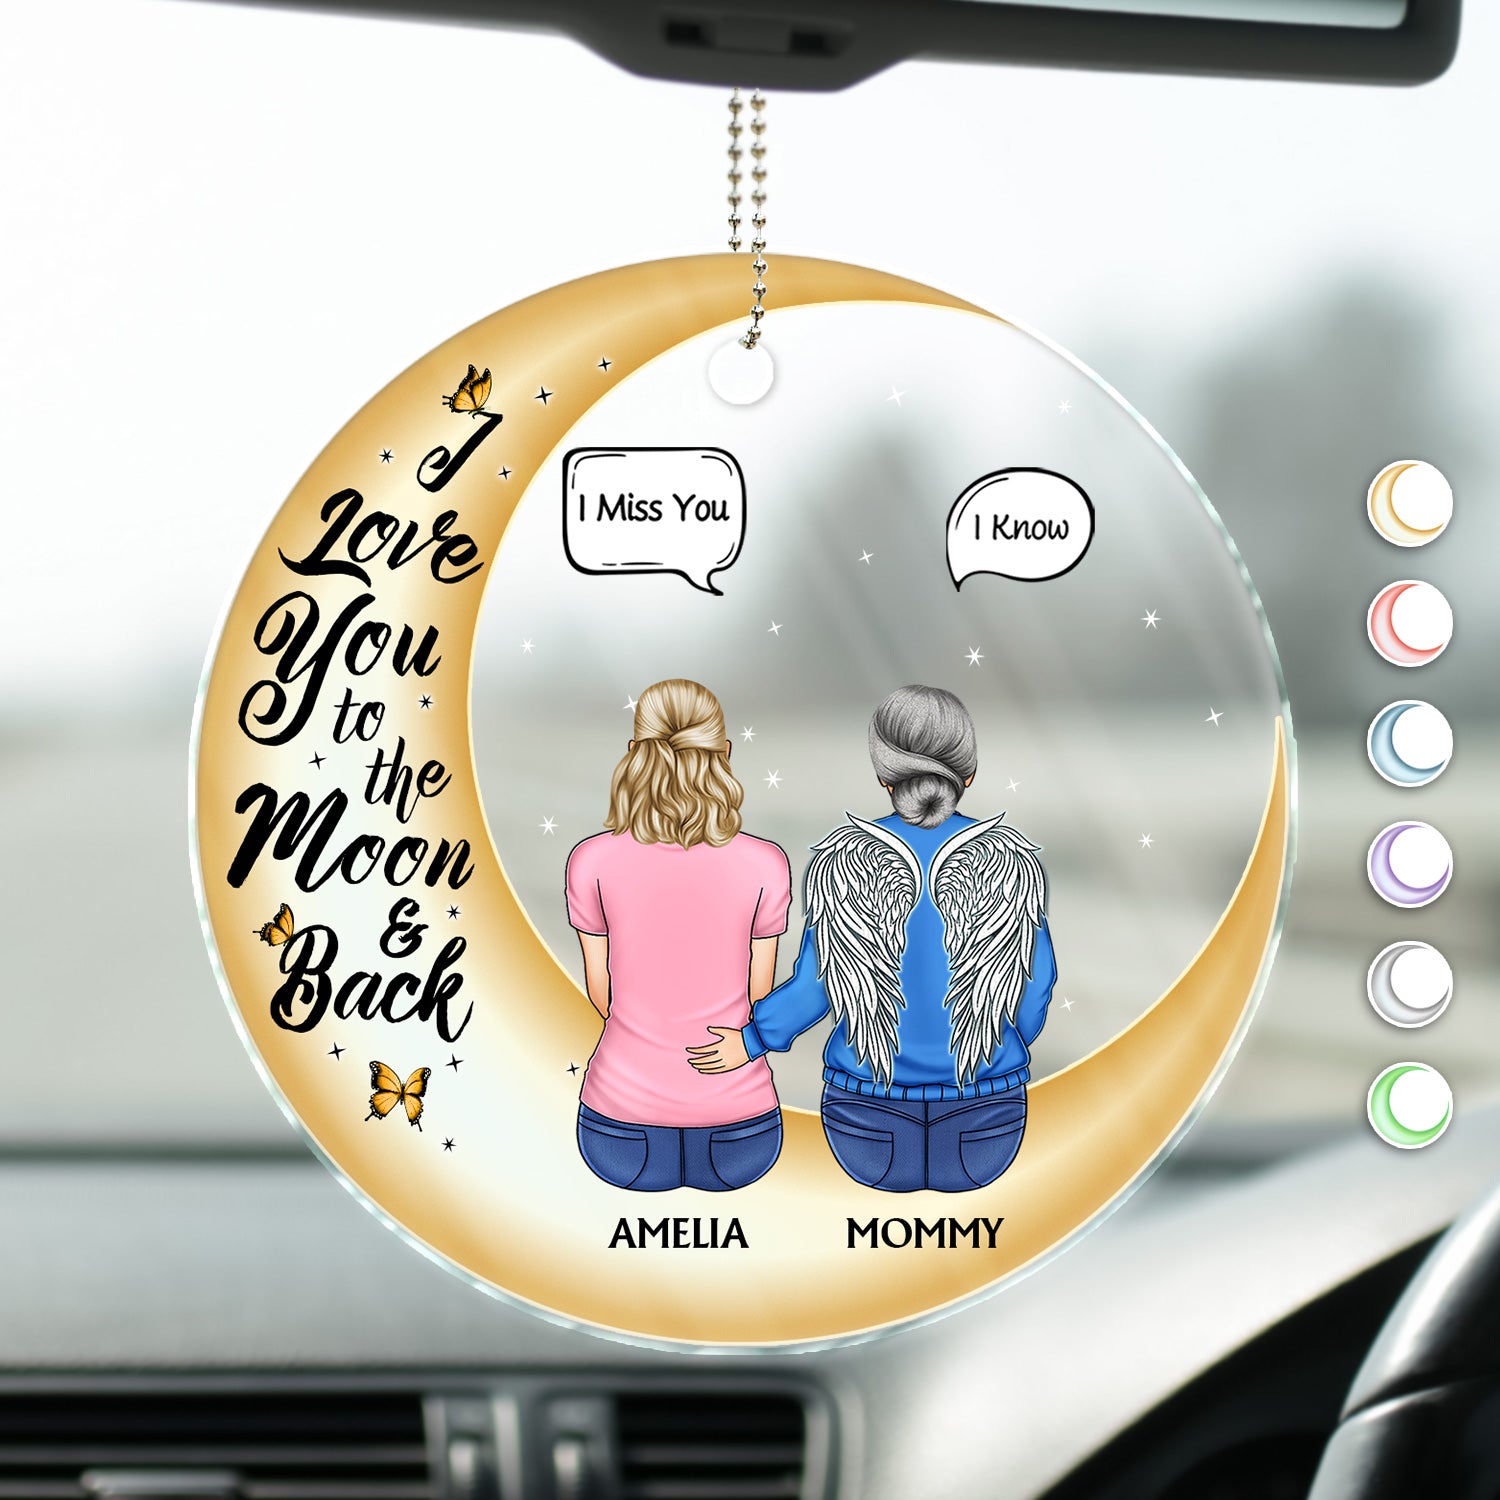 I Love You To The Moon And Back - Memorial Gift For Family, Friends, Siblings - Personalized Acrylic Car Hanger